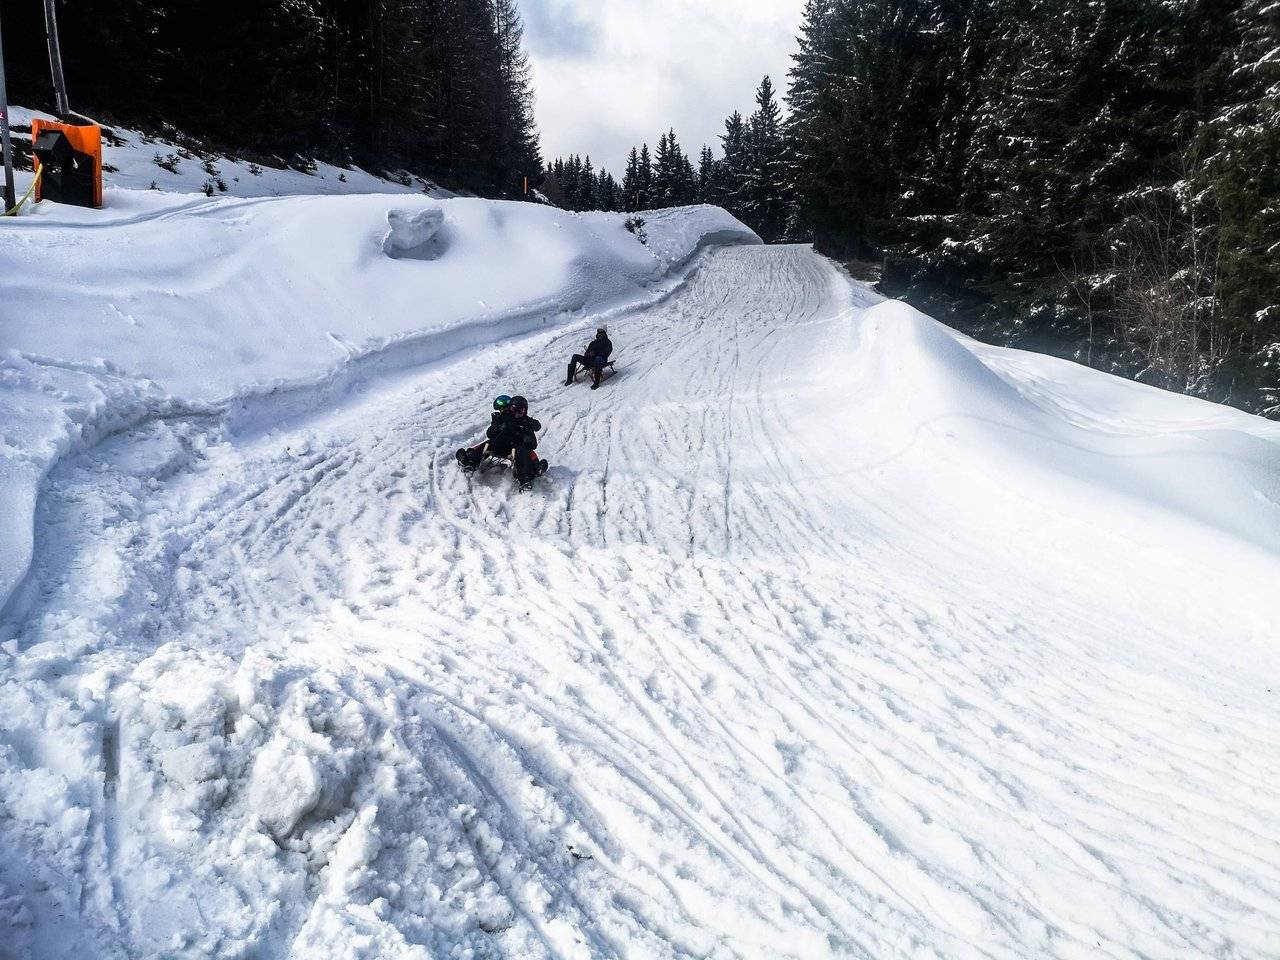   Even with your feet on the ground your sled will reach quite a speed. Breaking before any turn is essential. Photo by Alis Monte [CC BY-SA 4.0], via Connecting the Dots